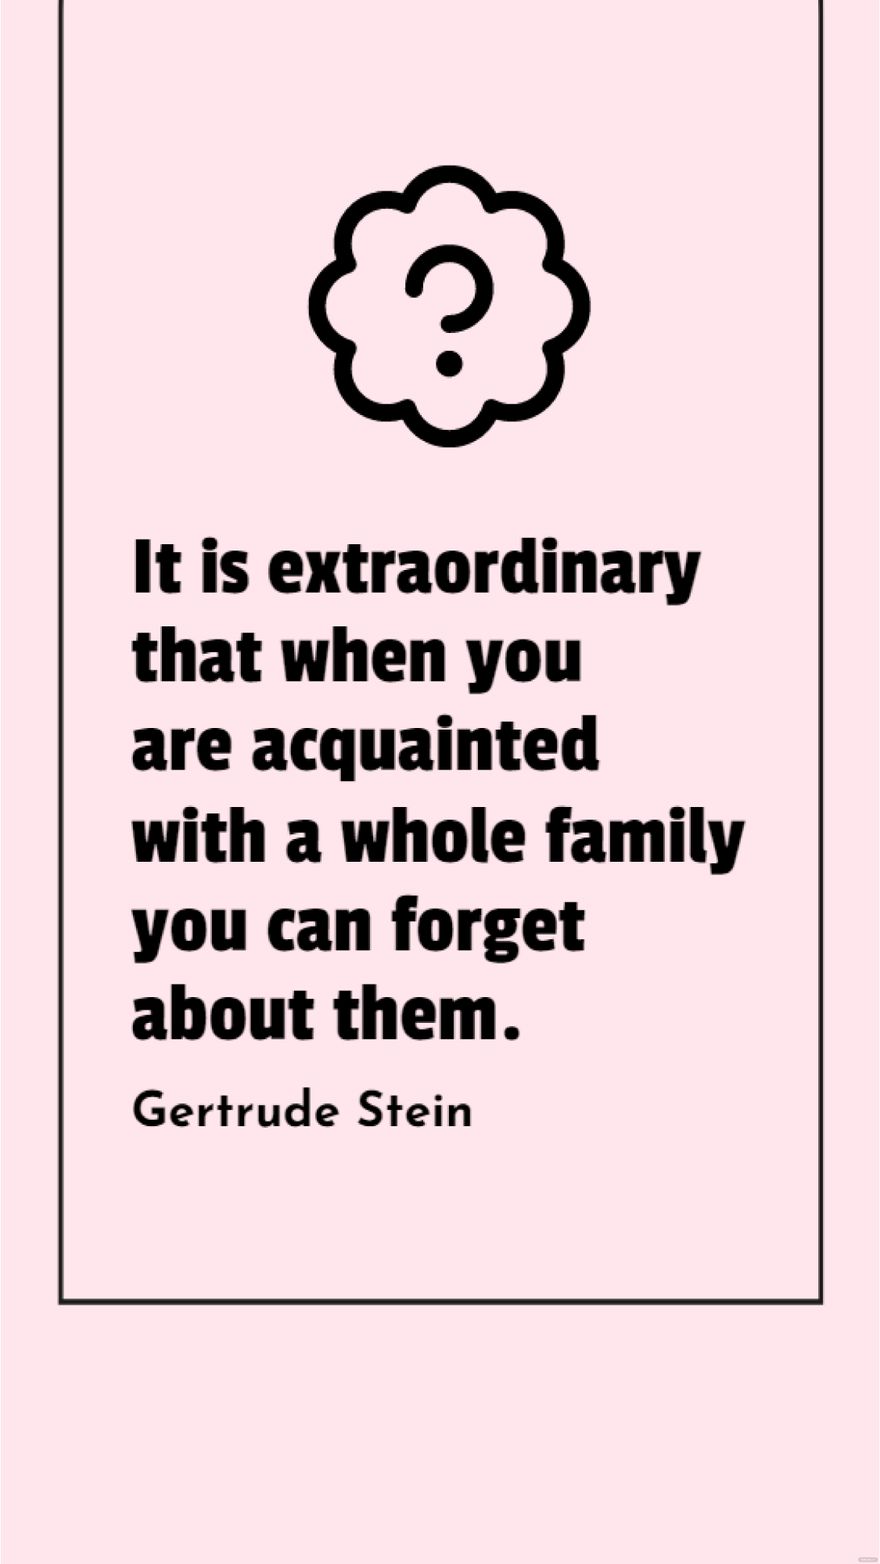 Free Gertrude Stein - It is extraordinary that when you are acquainted with a whole family you can forget about them.